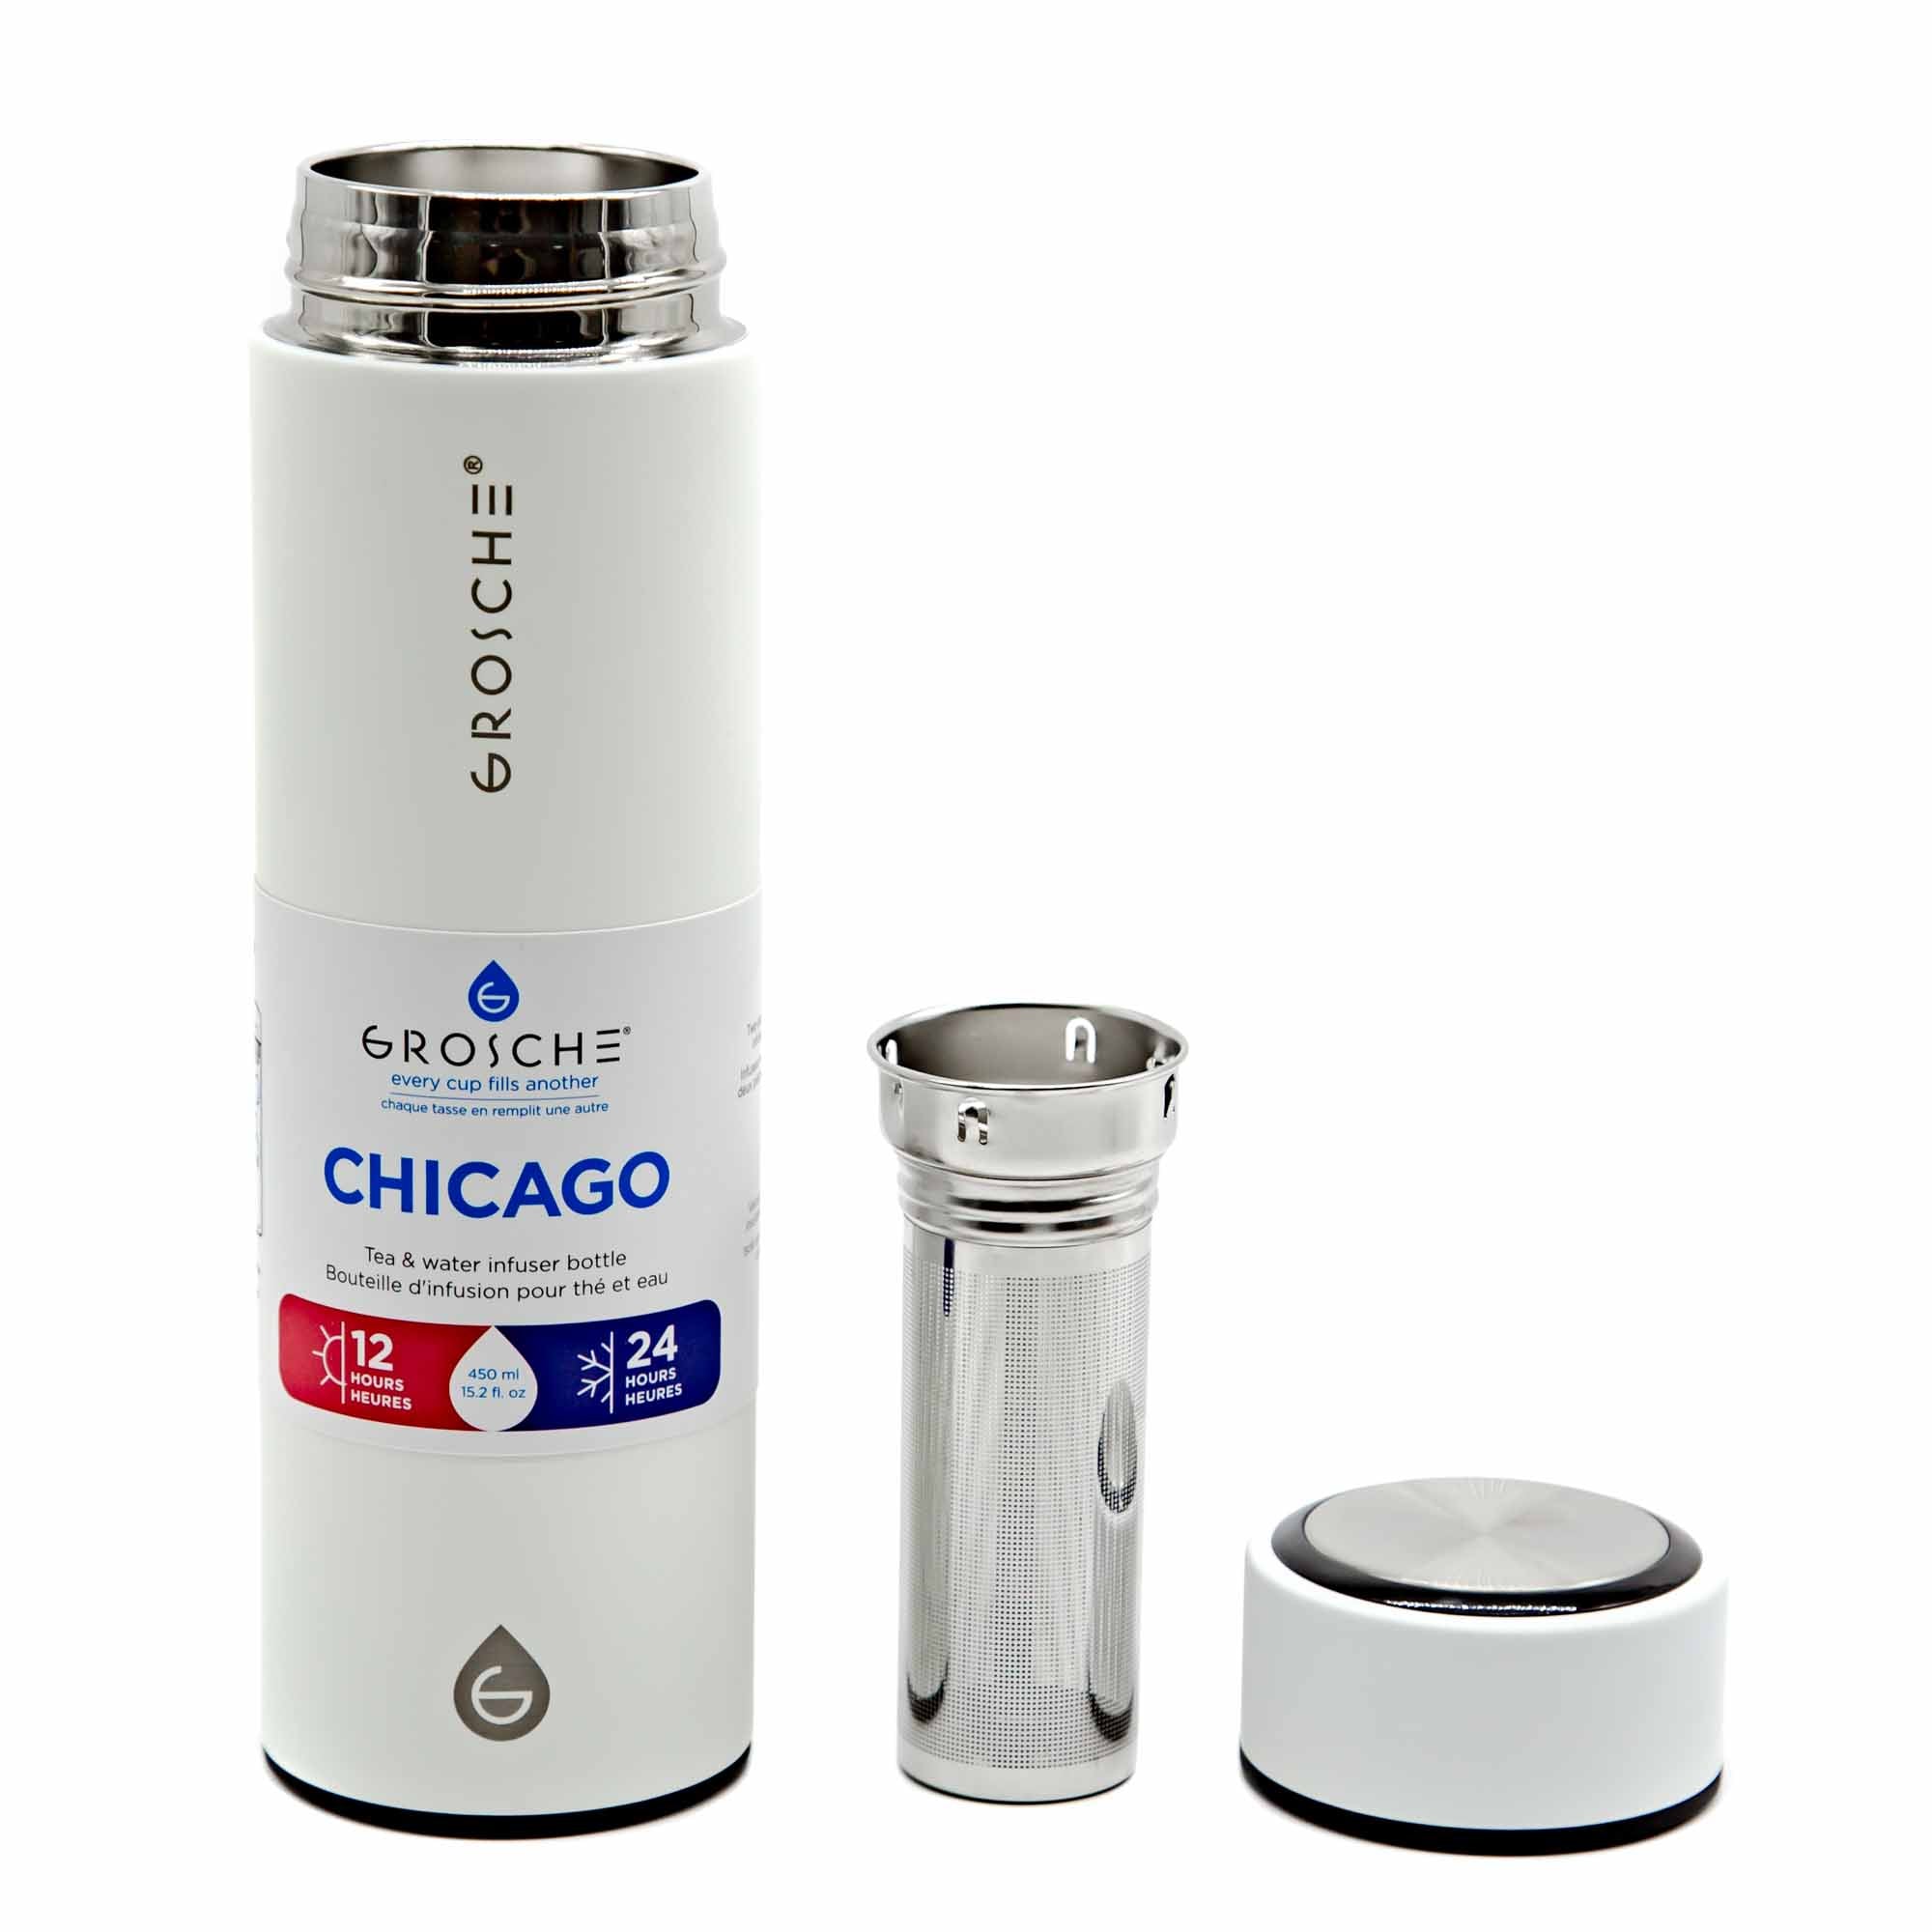 Grosche Chicago Travel Tea Infuser - 2 Colours - Mortise And Tenon